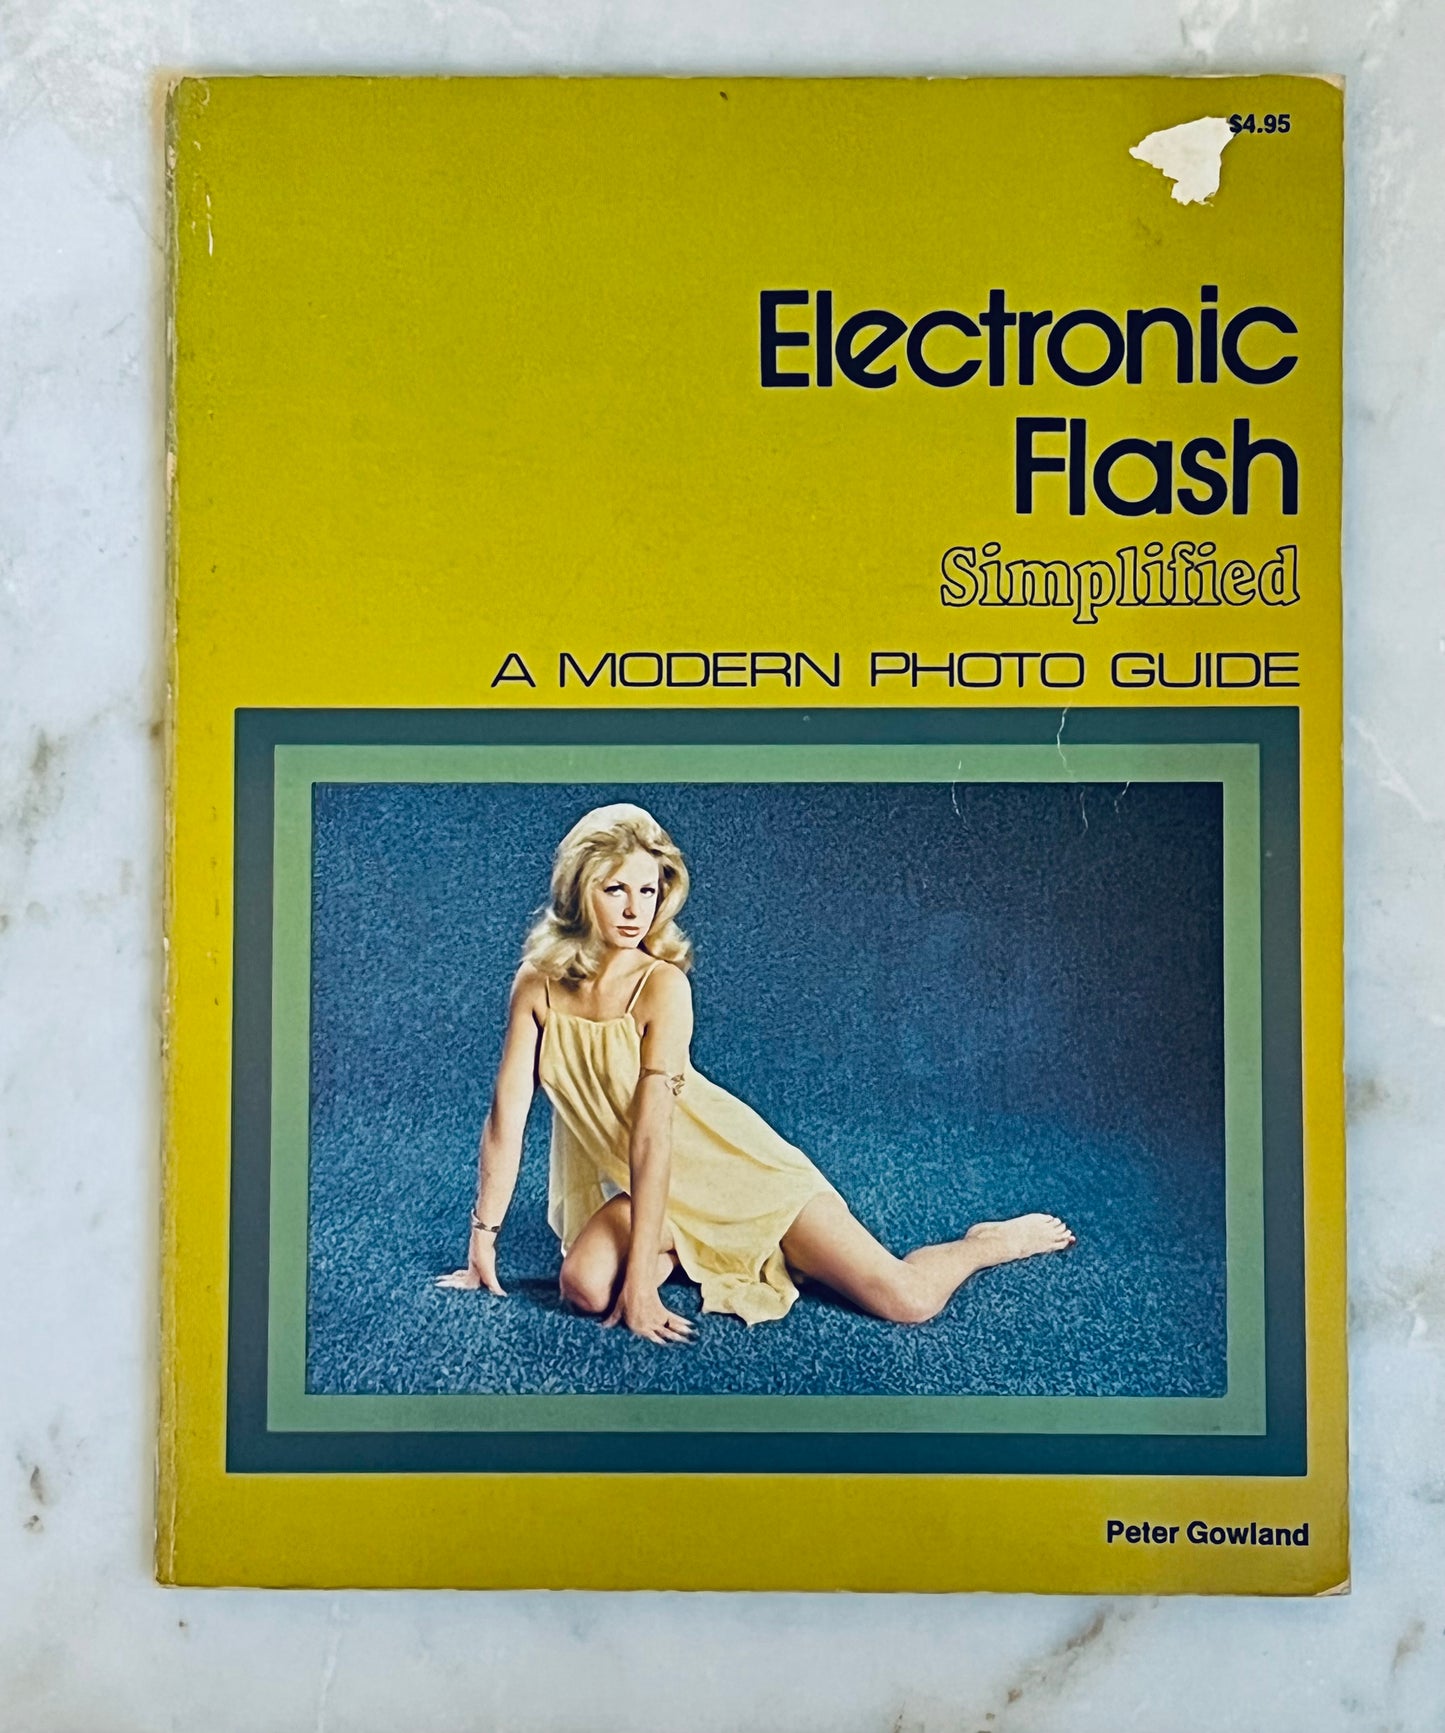 Electronic Flash Simplified (Photo Guide)